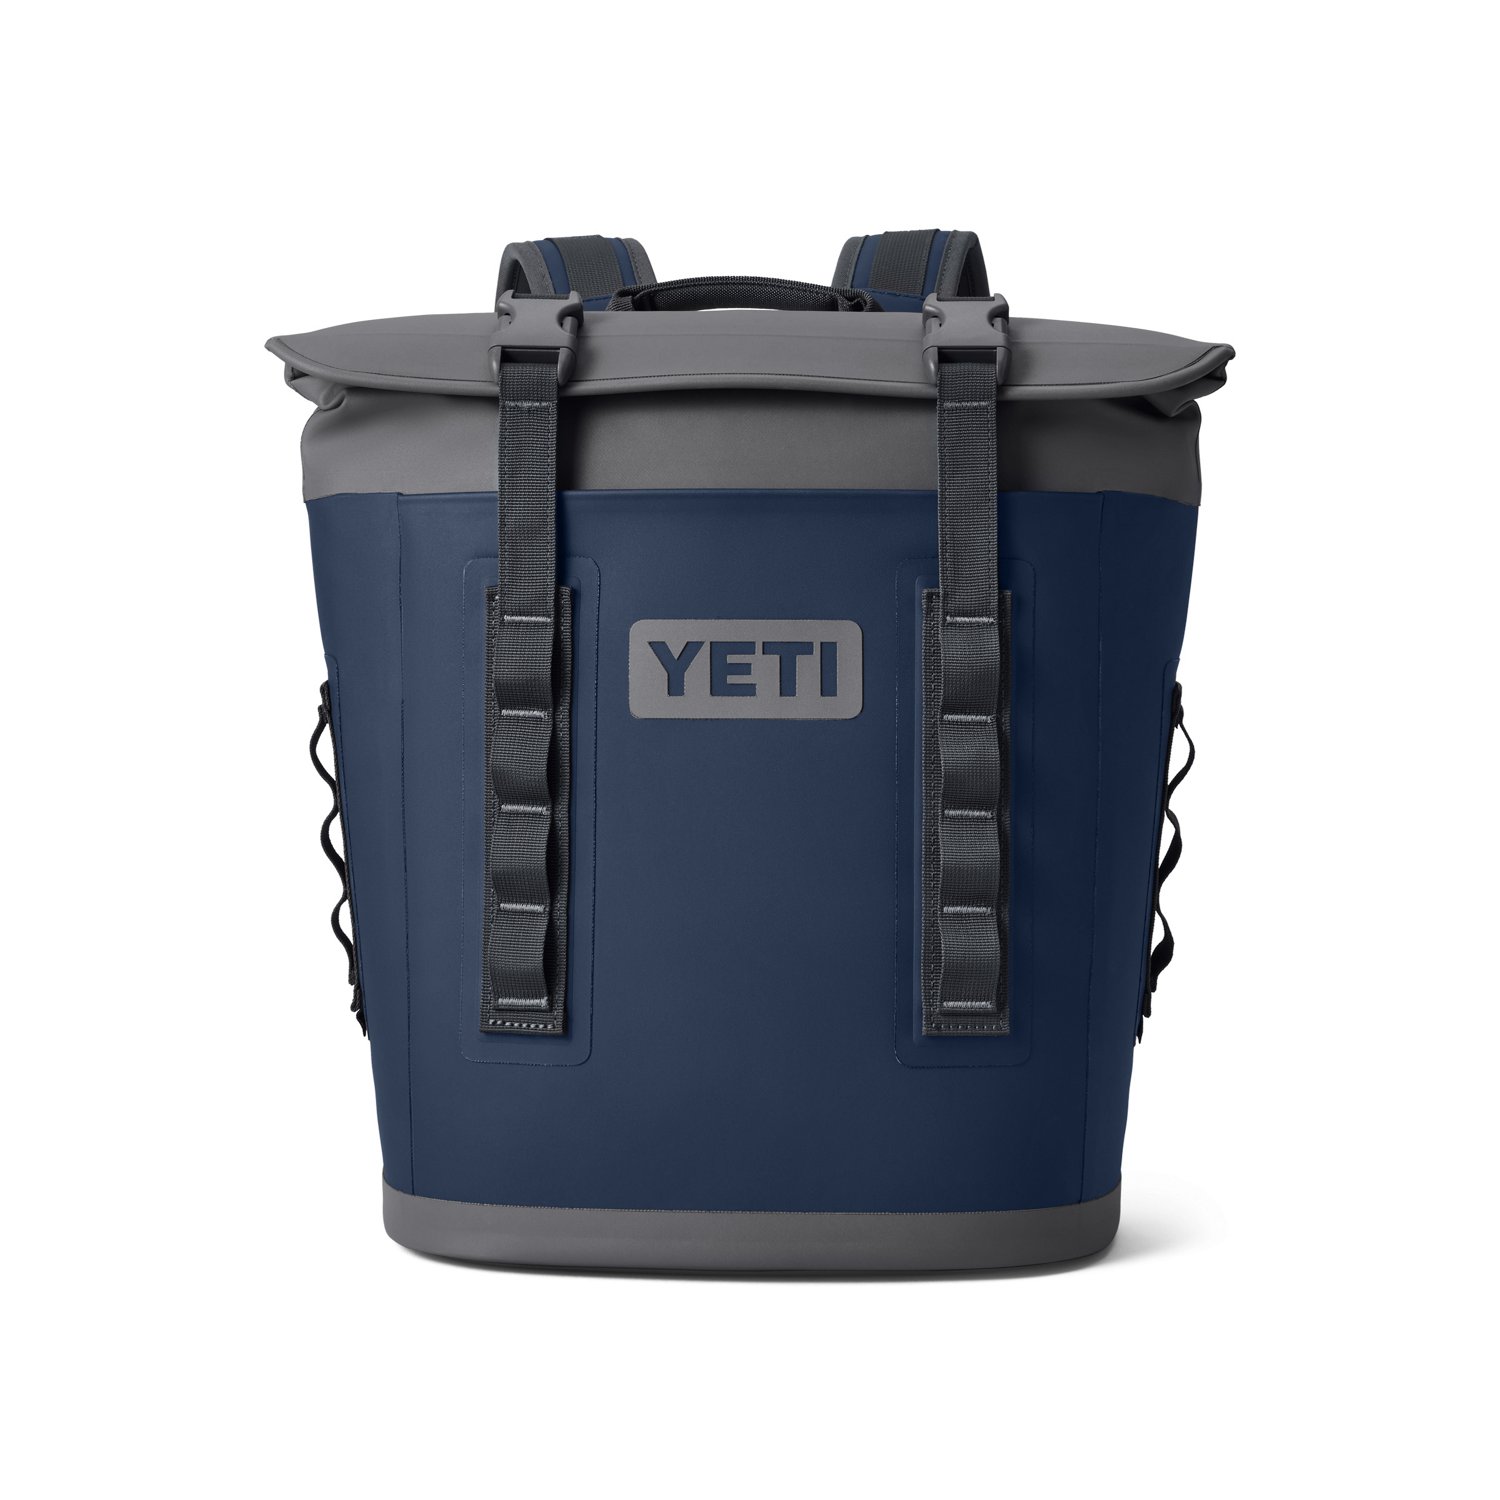 https://academy.scene7.com/is/image/academy//coolers/yeti-hopper-backpack-m12-soft-cooler-18060131263-blue/7d58b88689bf4c8cb62e5009ff080721?$d-plp-product-image$